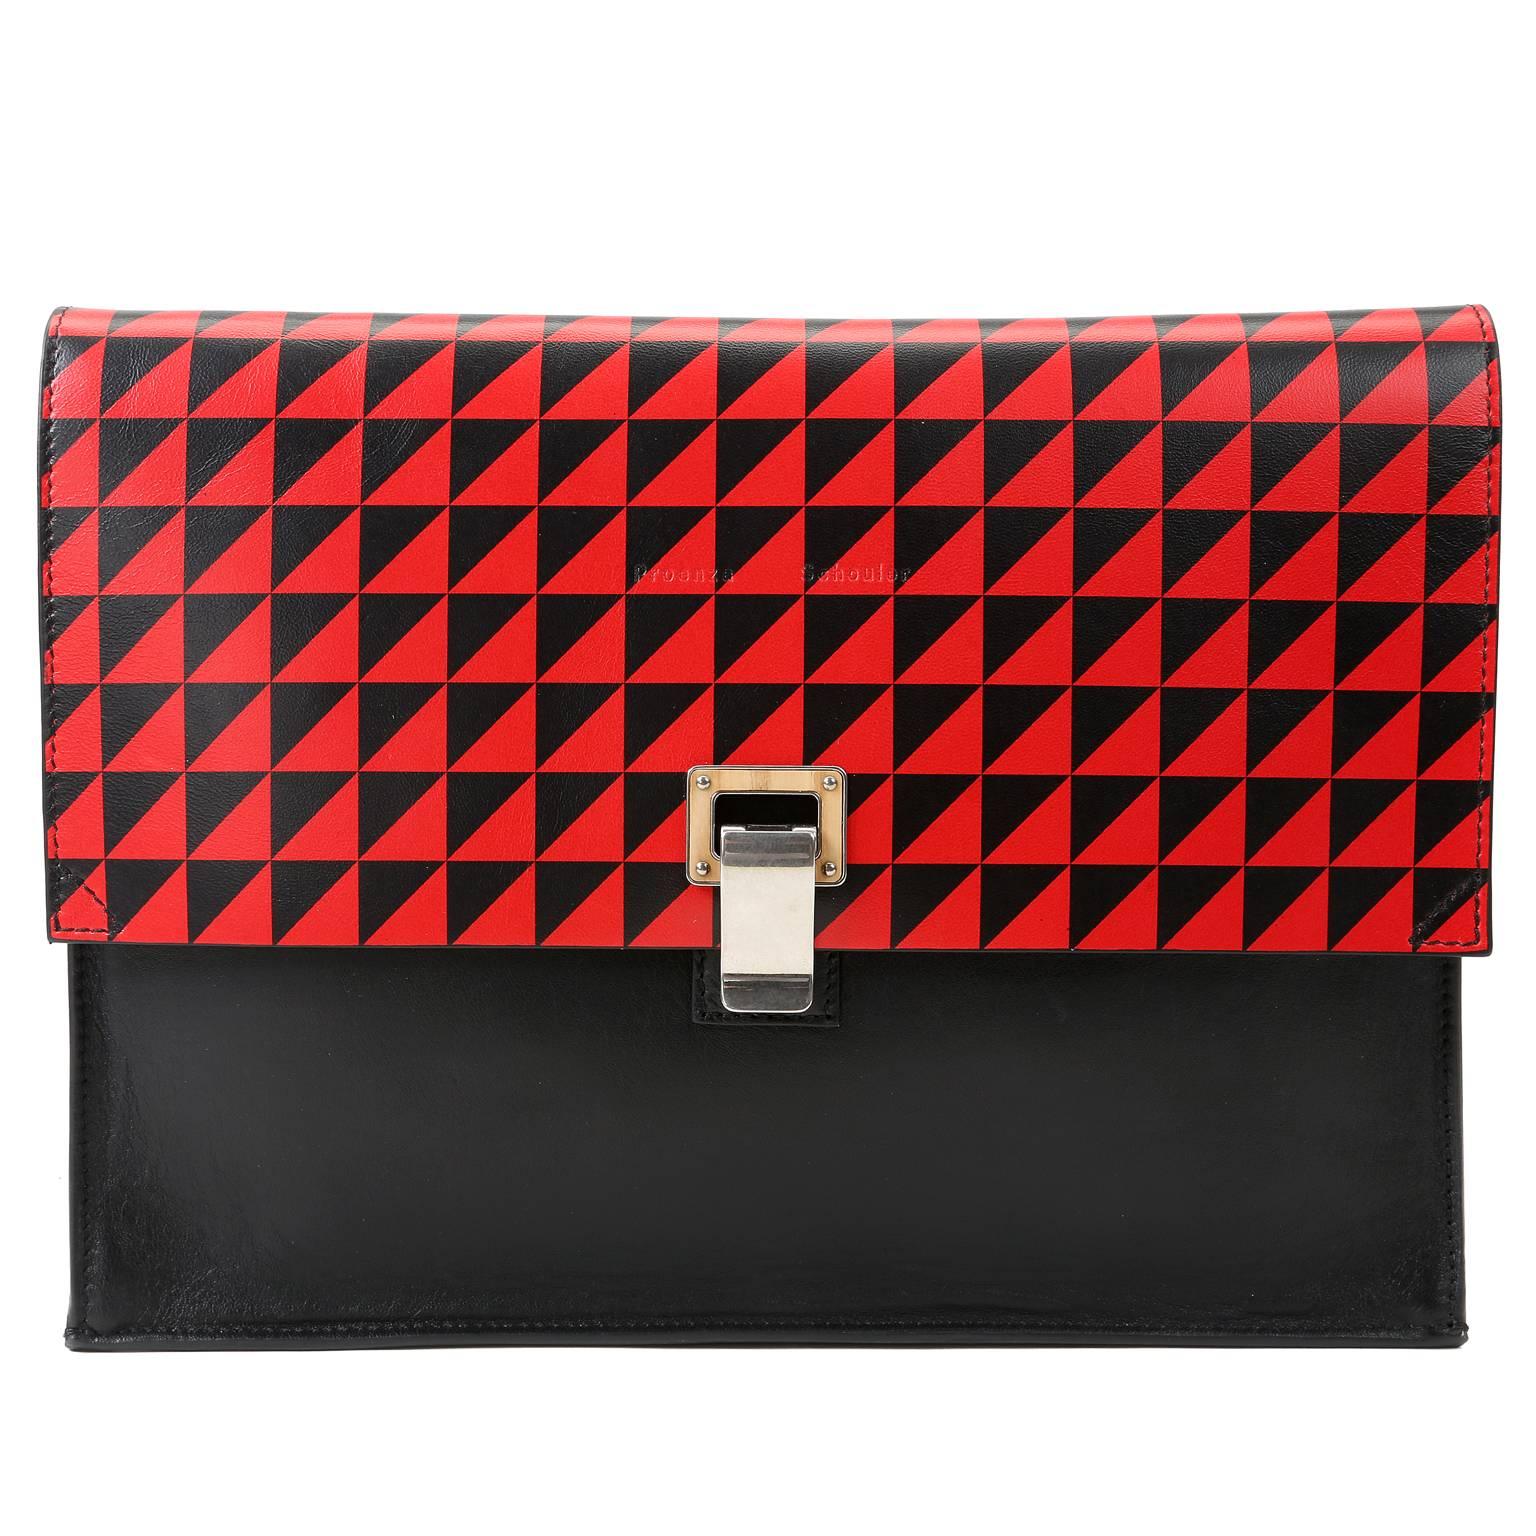 Proenza Schouler Red and Black Leather Lunch Bag Clutch